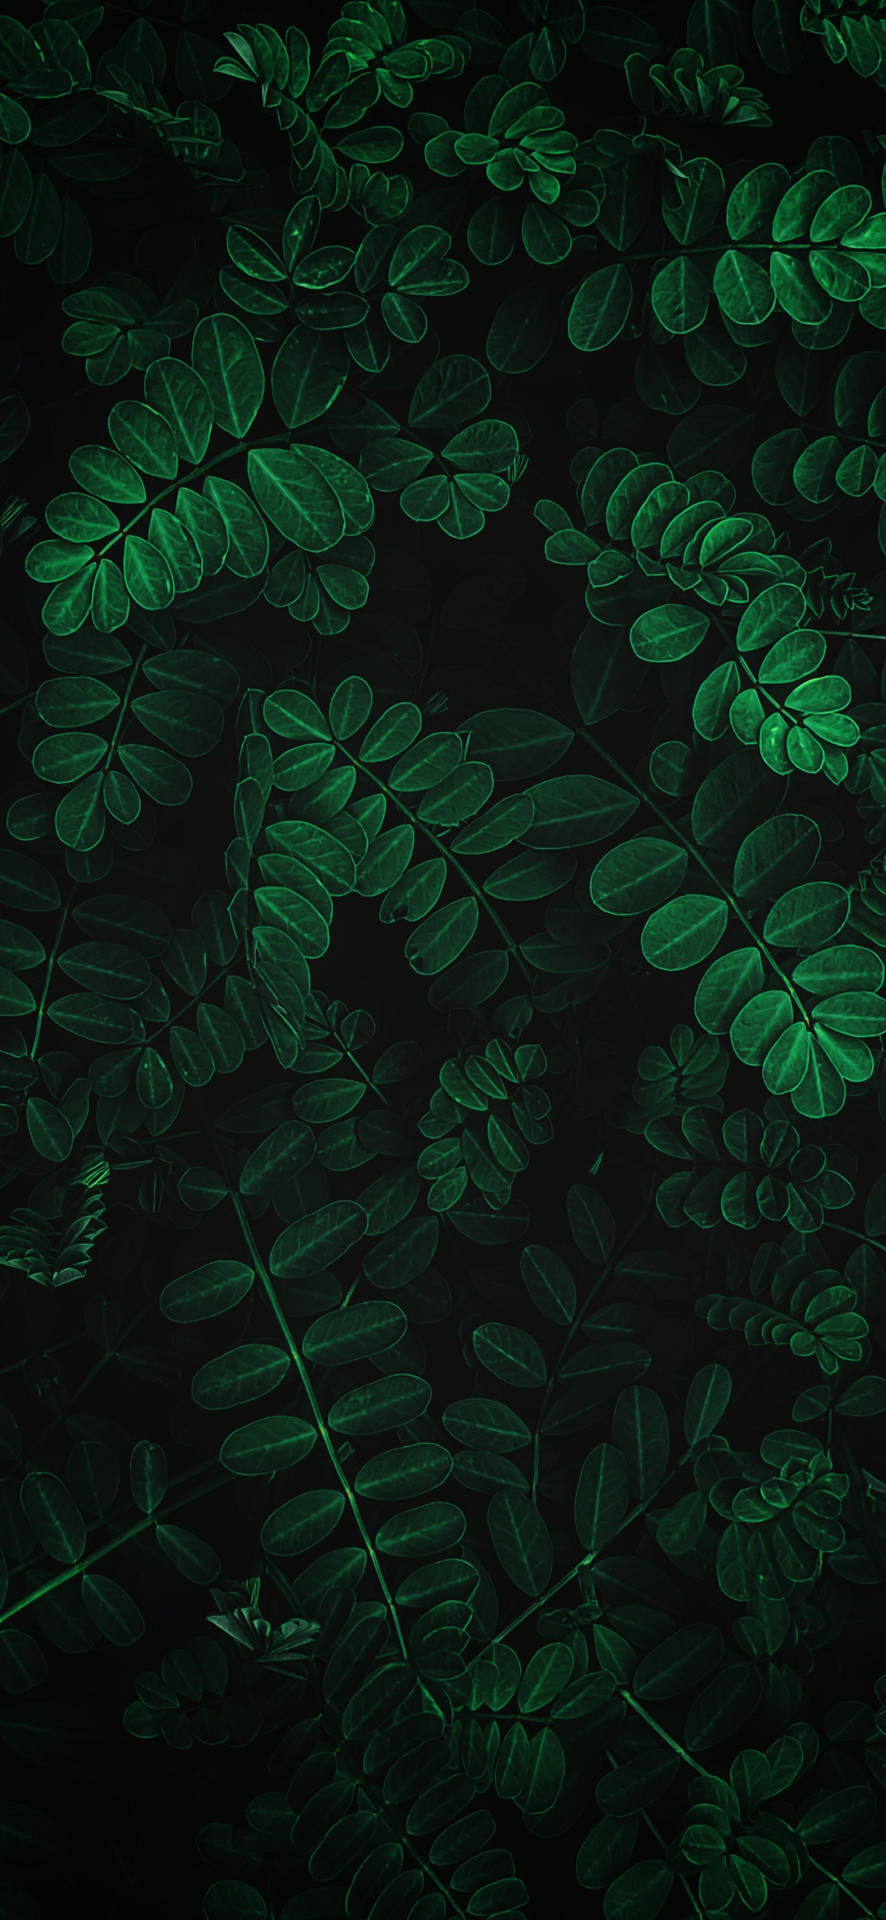 Connect with Nature and Plant Life for an Uplifting Screen Background Wallpaper